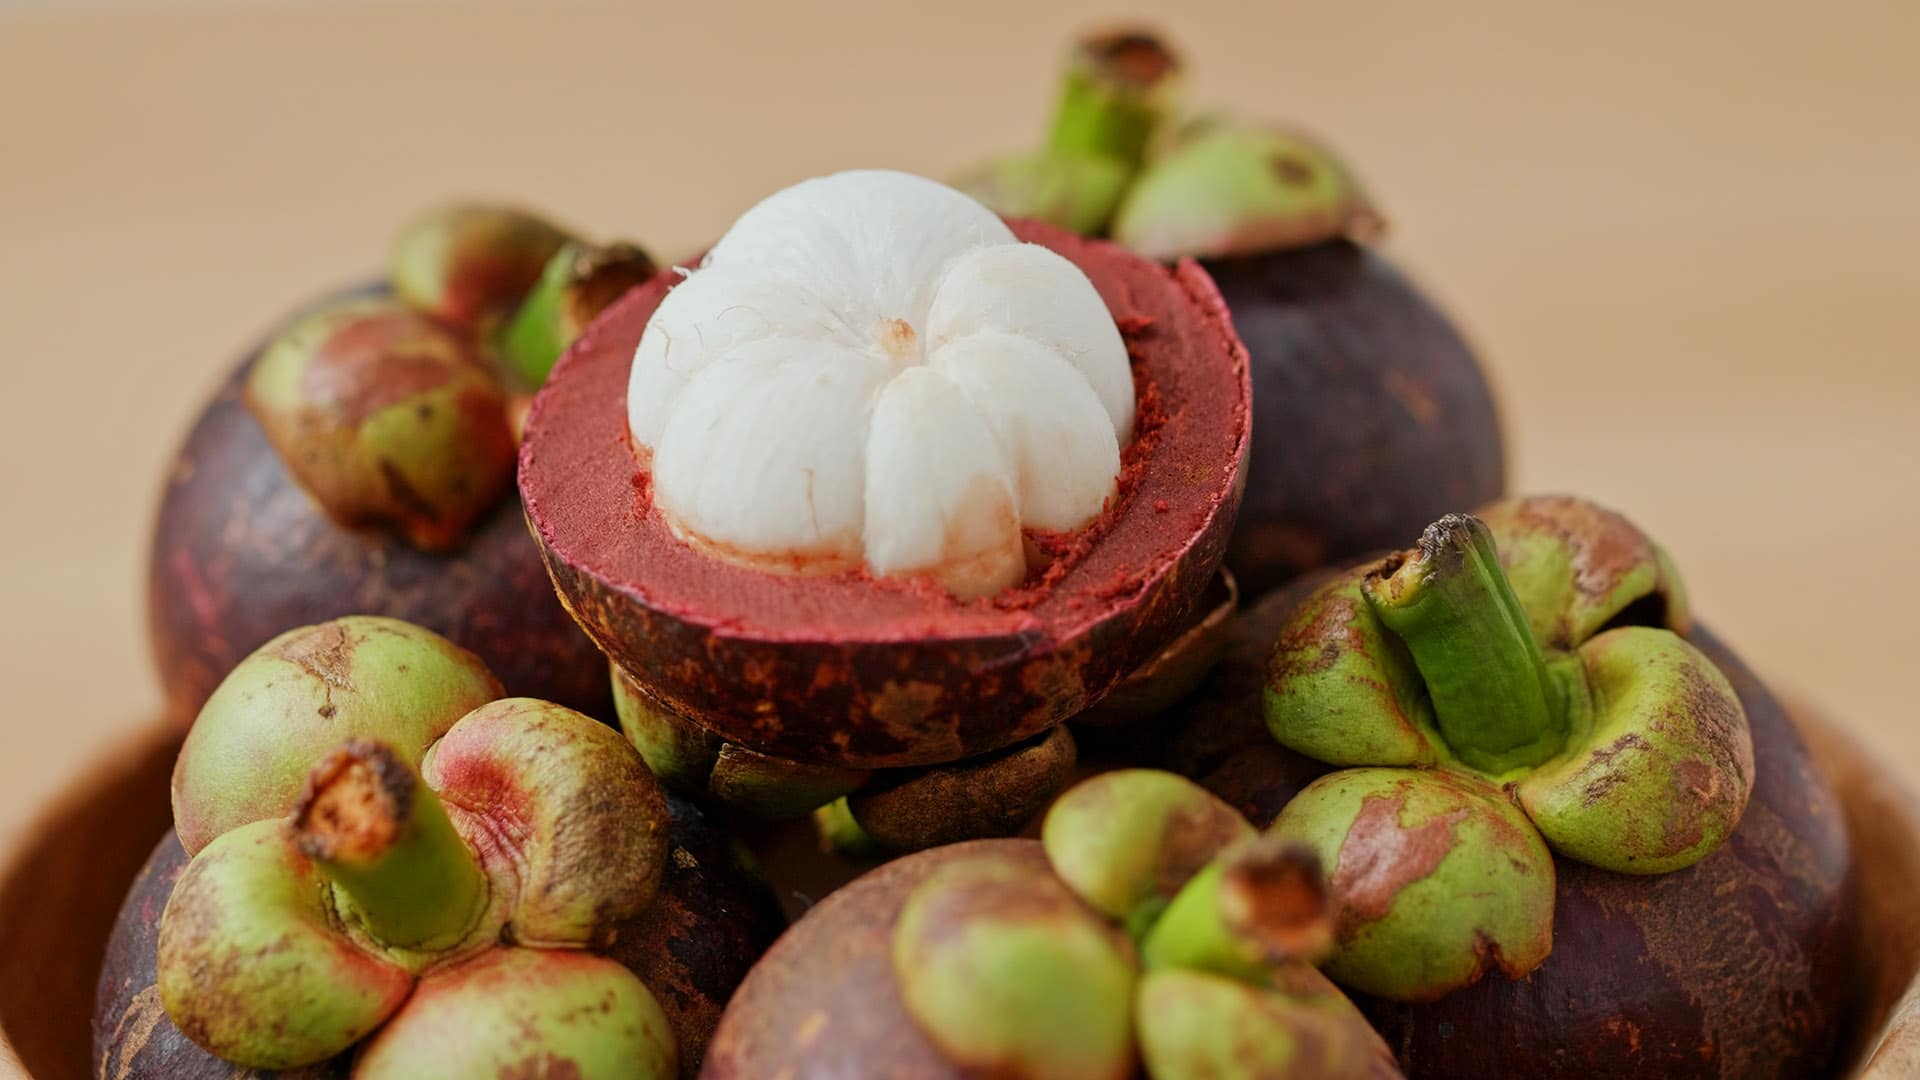 Mangosteen: Rich purple color comes from natural pigments called anthocyanins. 1920x1080 Full HD Wallpaper.